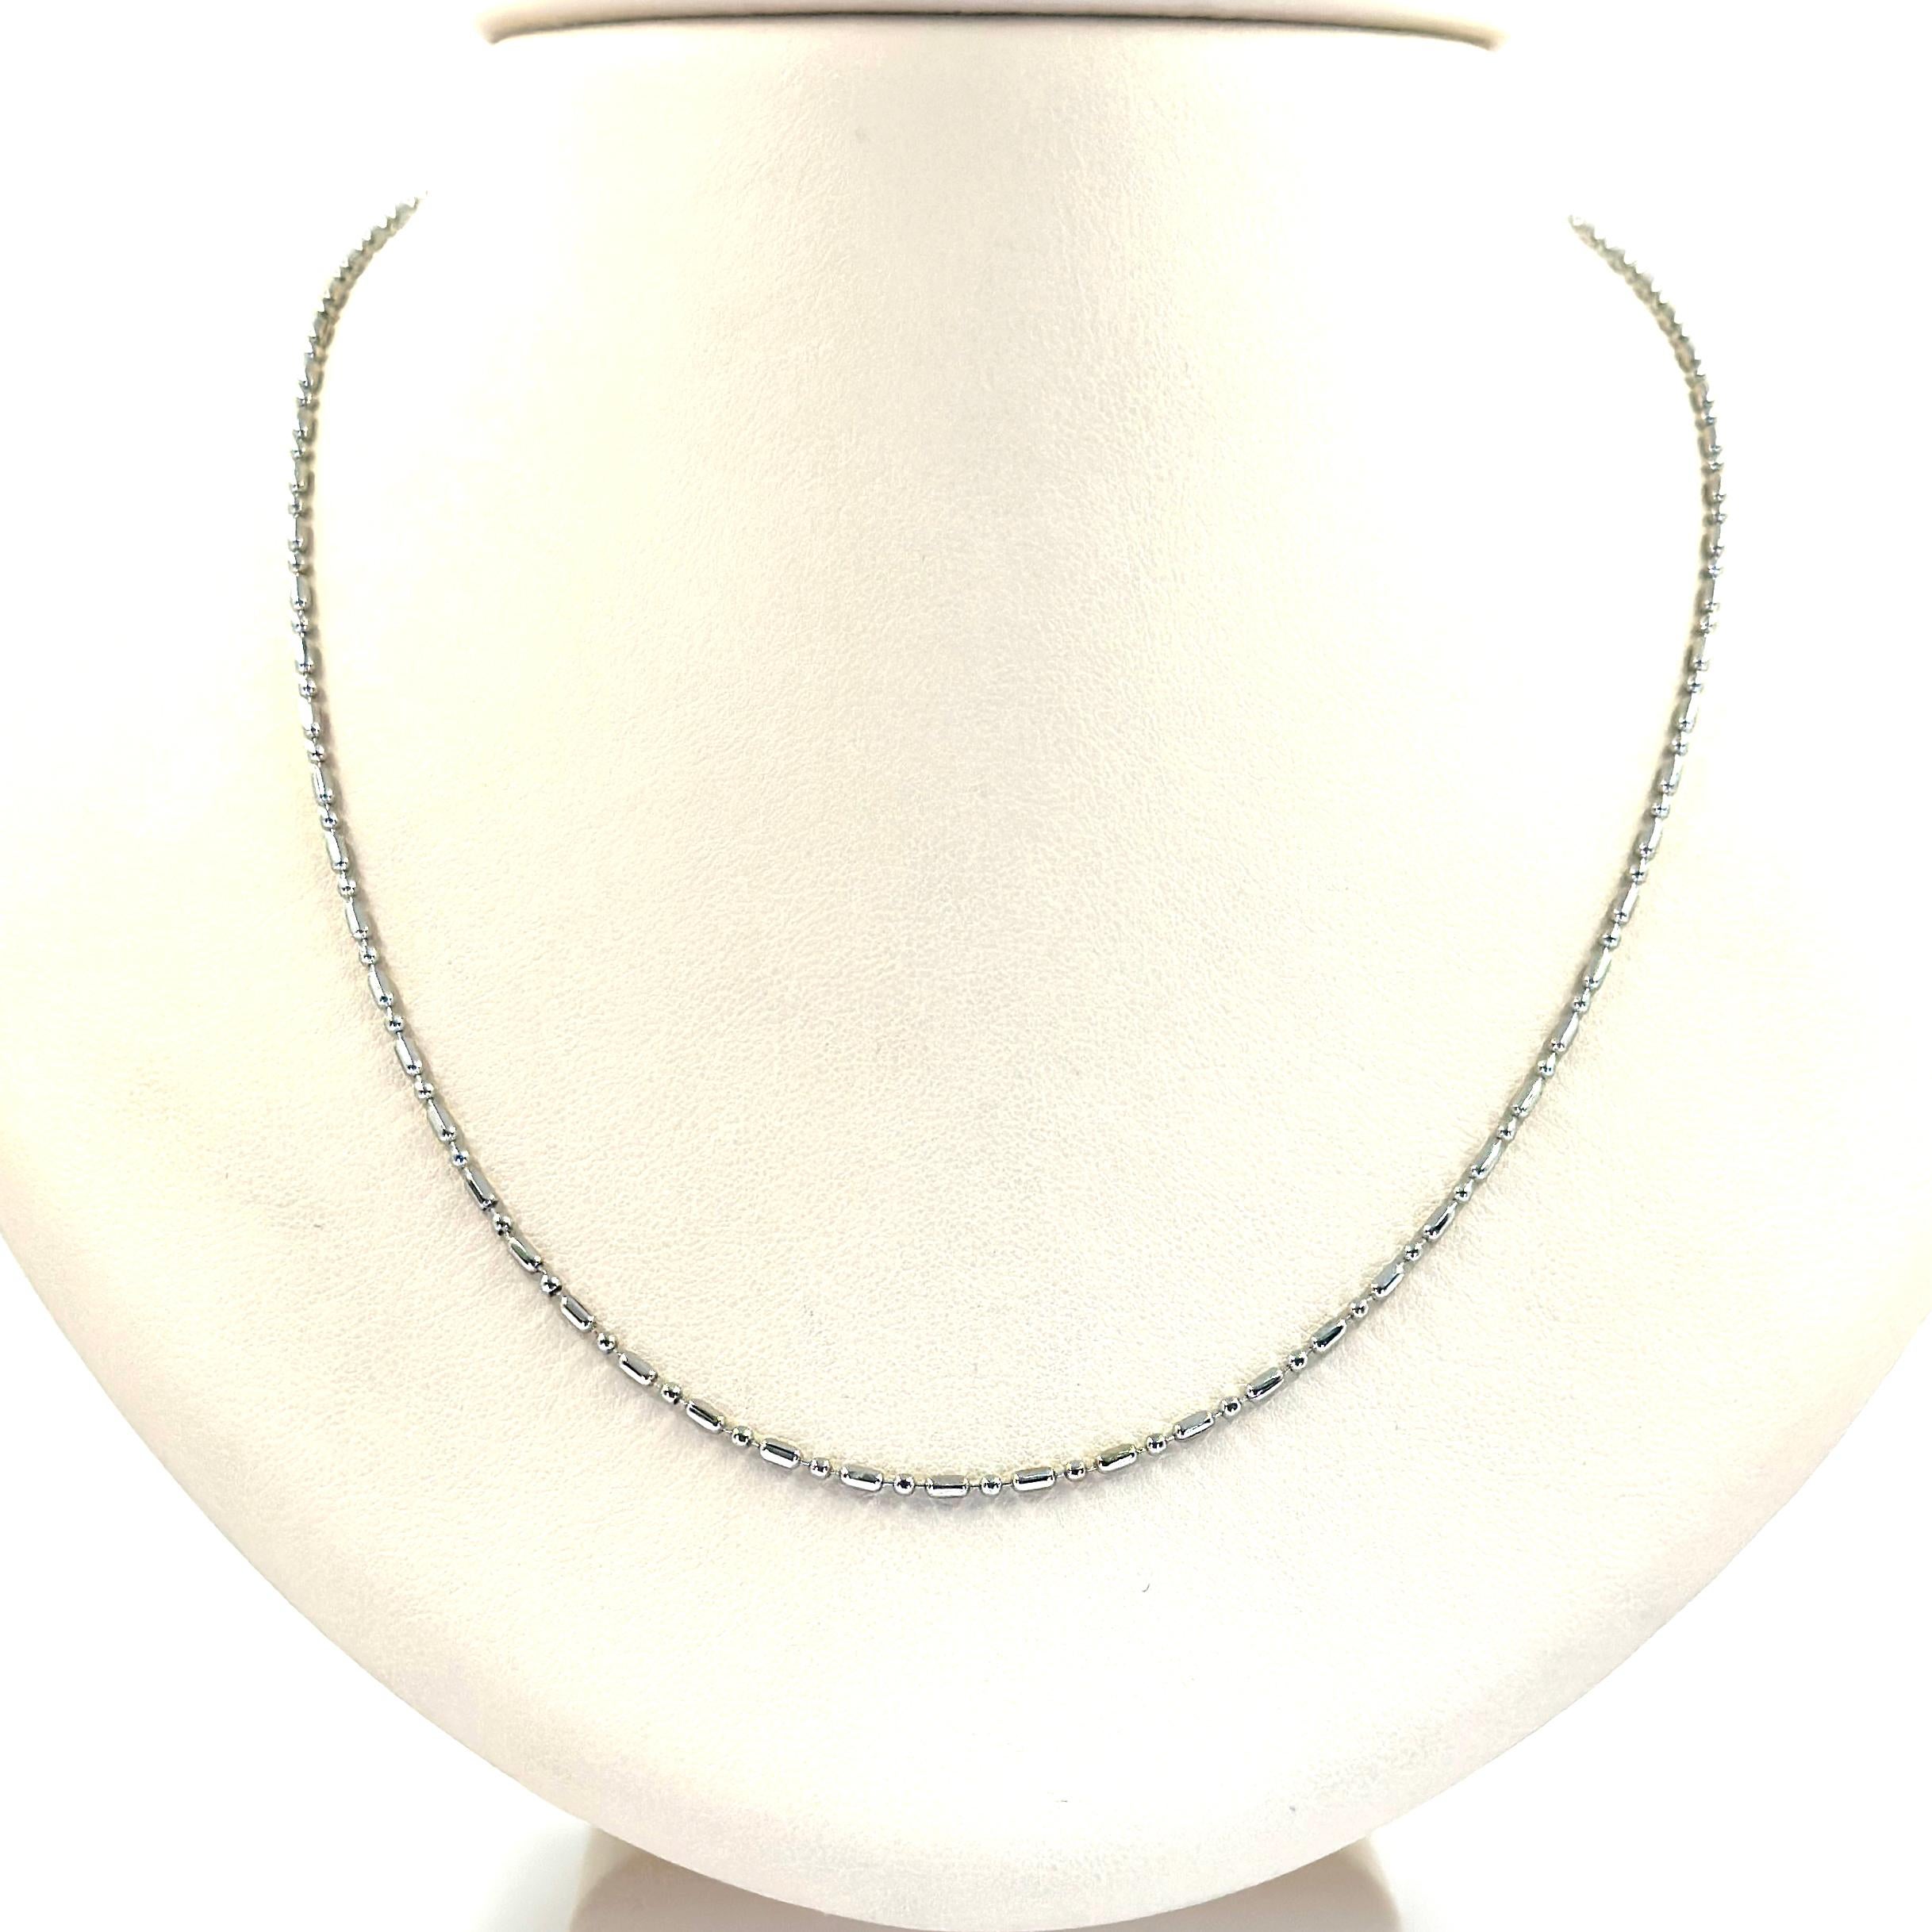 18 Karat White Gold Dot Dash Chain Measuring 19.5 Inches Long. Finished Weight is 4.2 Grams.